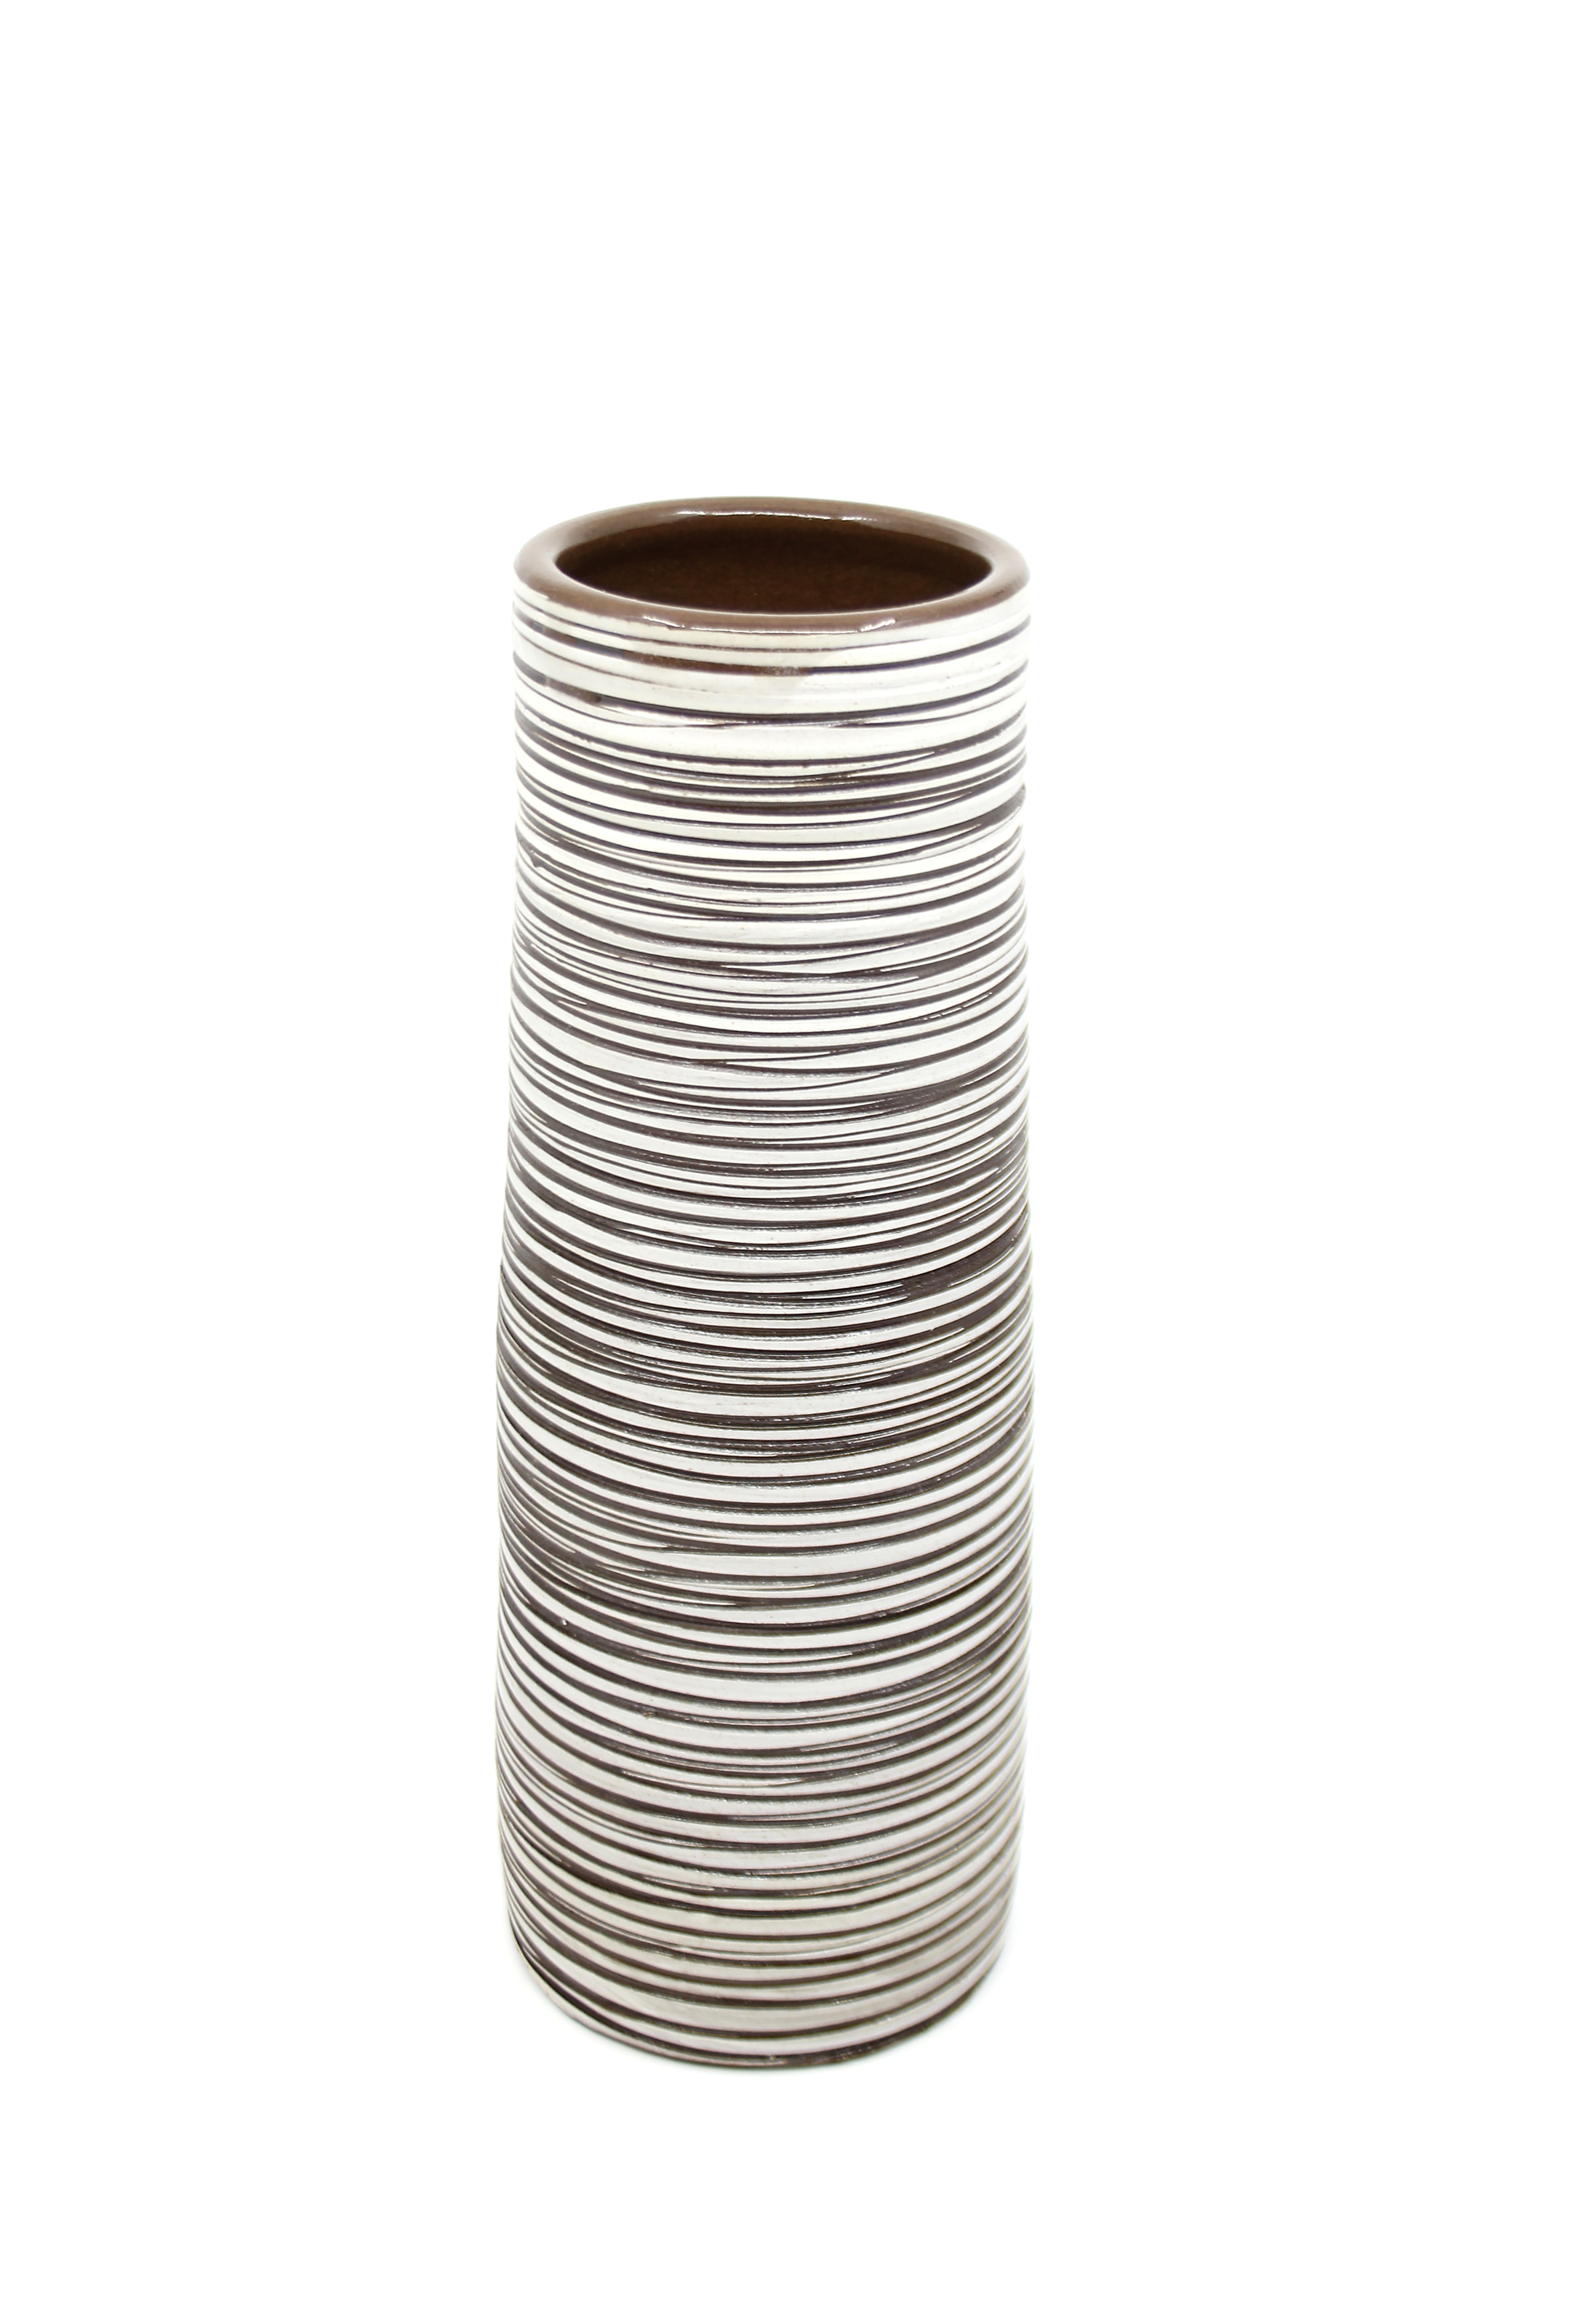 Tall Vase With Brown and White Lines by Heather Bradley